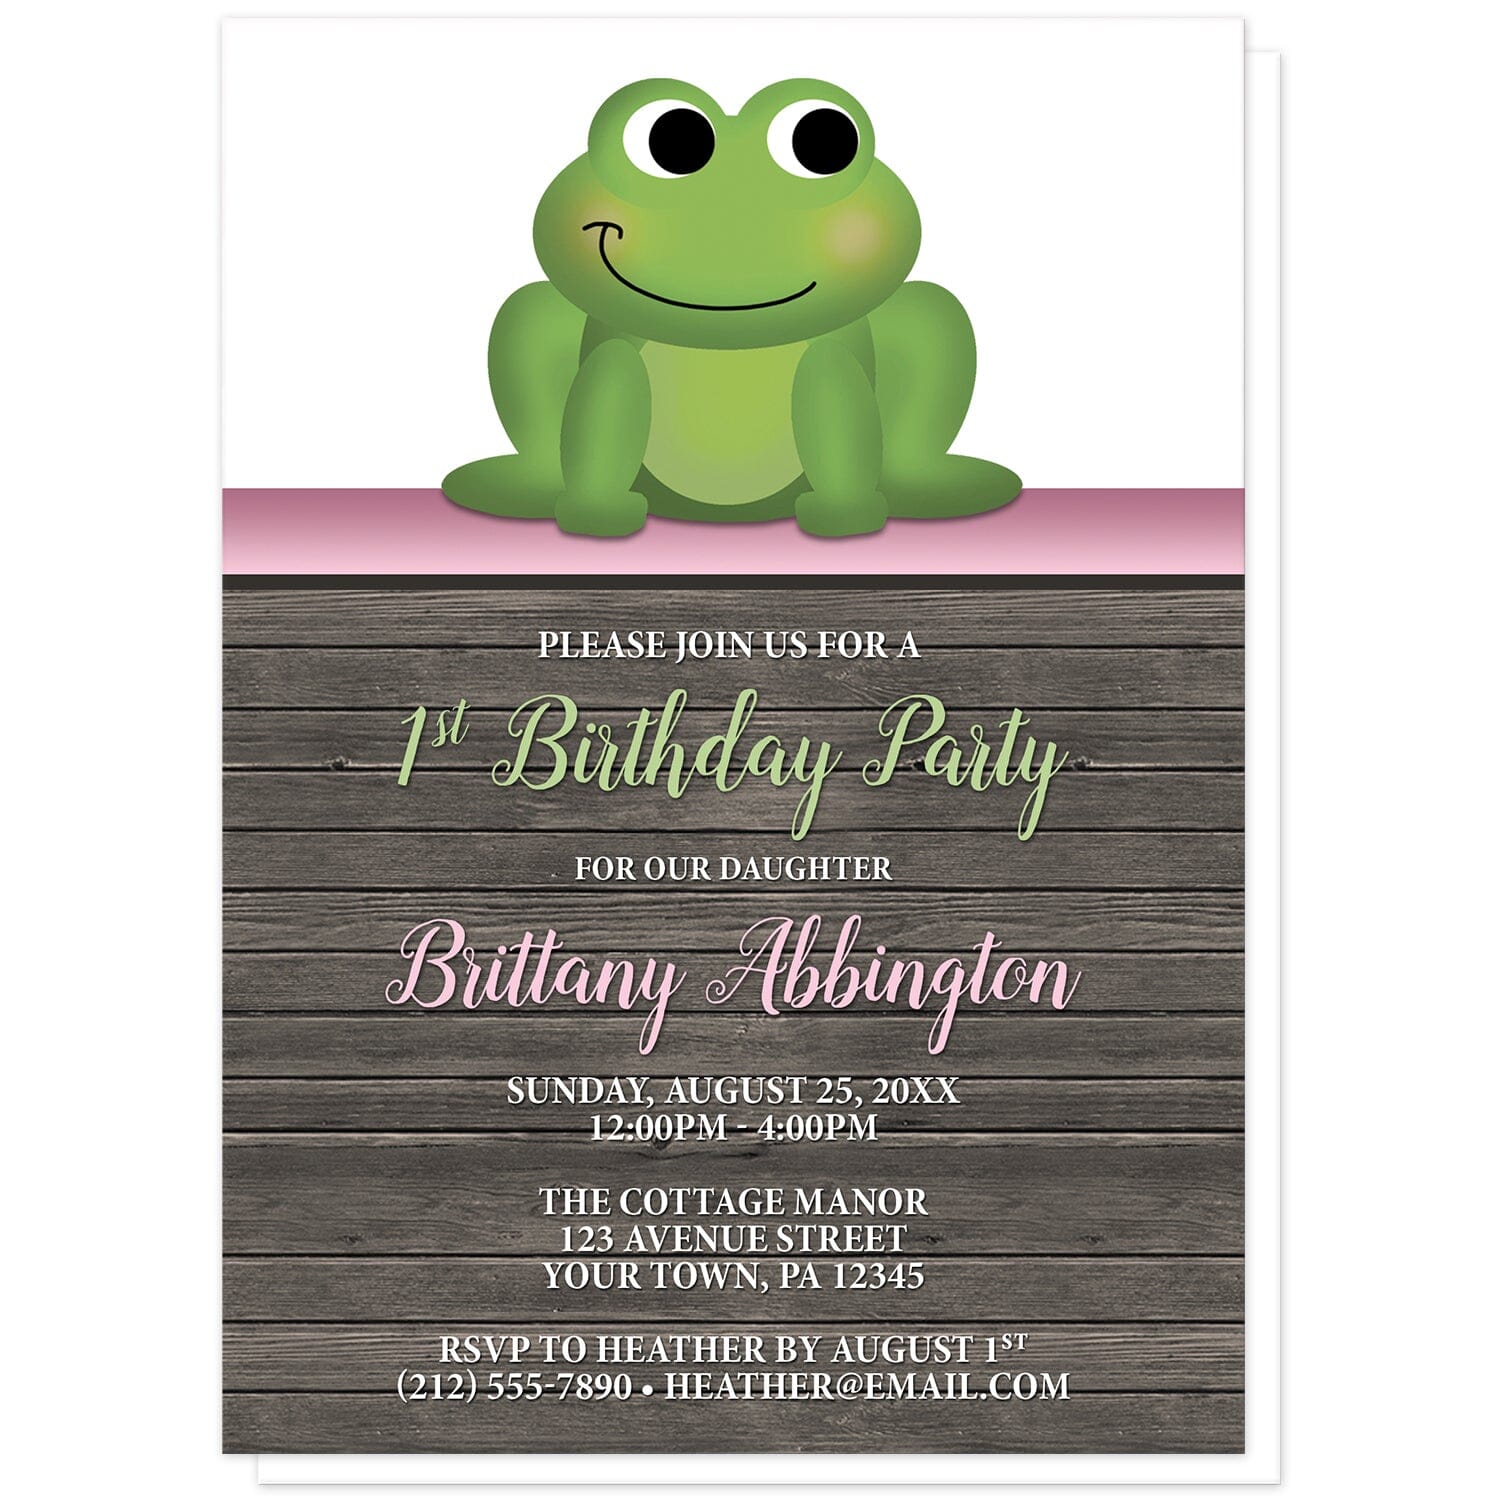 Cute Frog Green Pink Rustic Wood 1st Birthday Invitations at Artistically Invited. Cute frog green pink rustic wood 1st birthday invitations with an illustration of an adorable green frog. A gradient pink stripe separates the cute frog from your personalized birthday party details which are custom printed in pink, green, and white over a rustic brown wood background. 